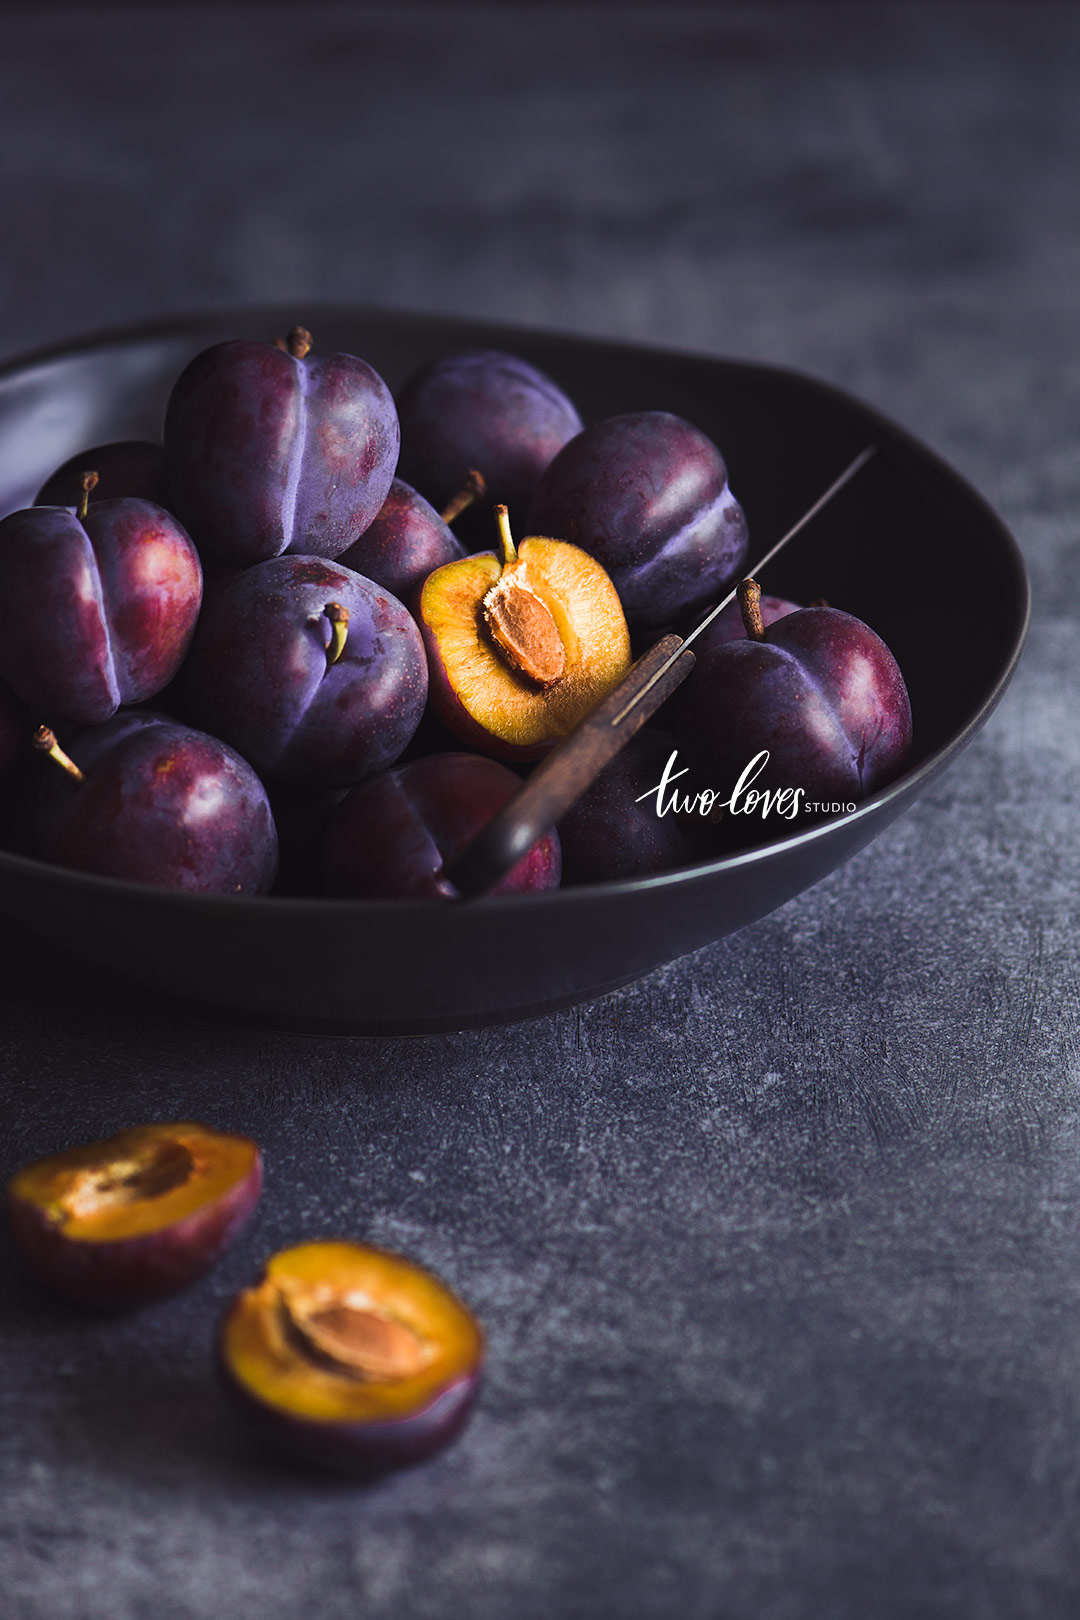 A bowl of plums and one cut in half